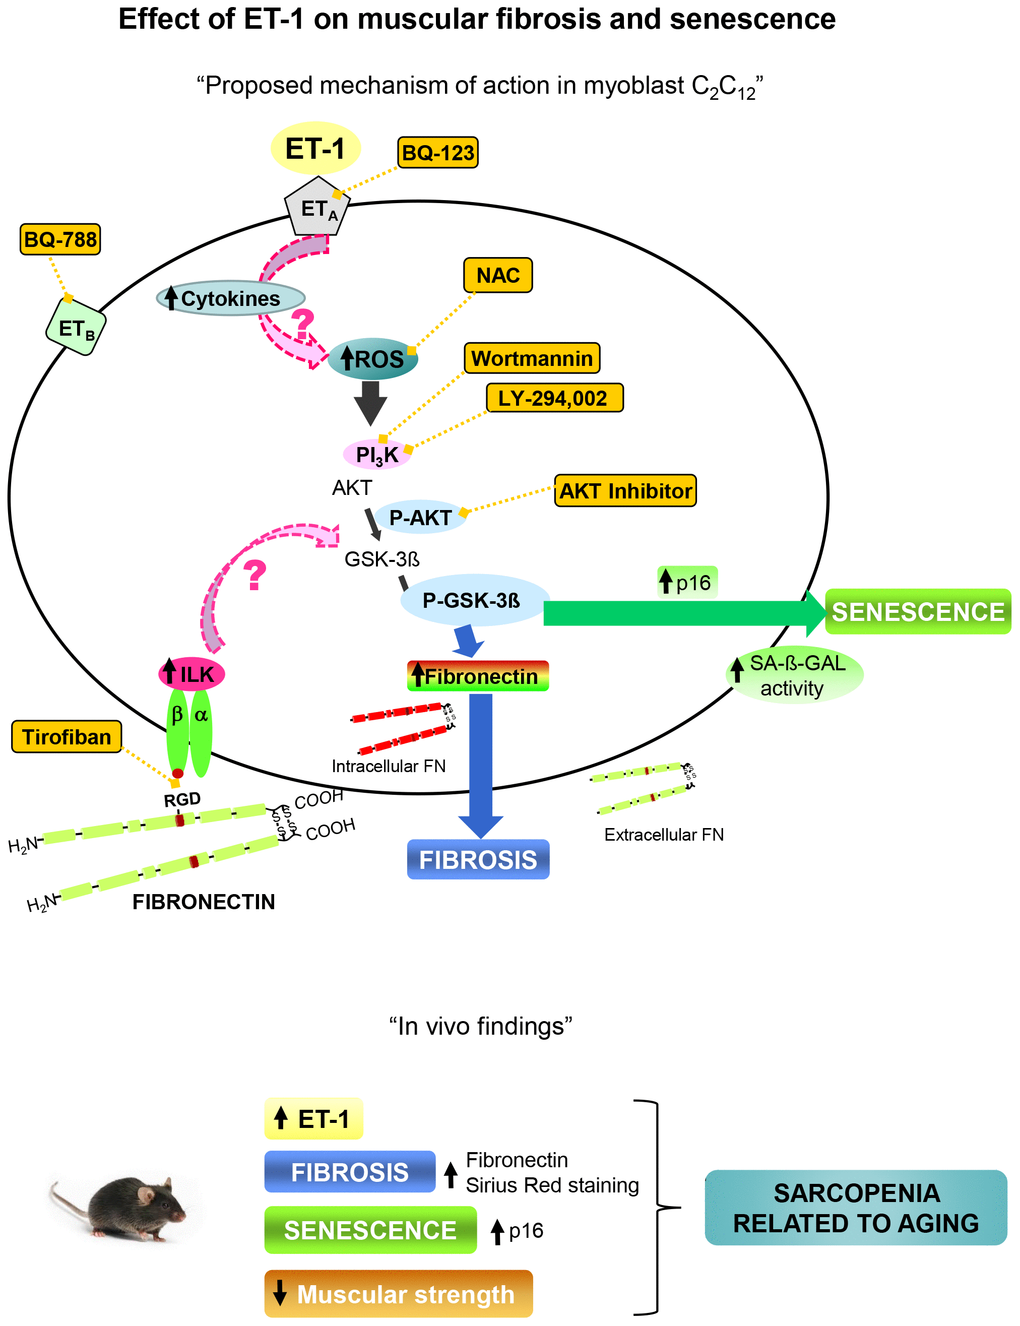 Proposal mechanism of action of ET-1 on muscular fibrosis and senescence. Myoblast cells present both type of ET-1 receptors, ETA and ETB, which are inhibited by specific antagonists such as BQ123 and BQ788, respectively. The binding of ET-1 to ETA receptor induces fibrosis and senescence through ROS production by activation of PI3K-AKT-GSK pathway. The inflammation induced by ET-1 could be also implied. Several antagonists were used to inhibit both, ROS production with the antioxidant N-acetylcysteine (NAC), and the PI3K-AKT-GSK pathway with AKT inhibitor, LY-294,002 and Wortmannin, to check the mechanism. Fibronectin could induce senescence through integrin receptor activation by joining to RGD sequence, and then trigger some downstream pathways through ILK activation. Tirofiban blocks the joining of FN to RGD sequence. Findings in aged mice are showed below which are similar to those found in myoblast cells induced by ET-1, suggesting that the appearance of fibrosis and senescence could be involved in the genesis of sarcopenia related to aging. Note: all antagonists or inhibitors are represented in an orange box and unexplored mechanisms with an arrow with dashed pink line.